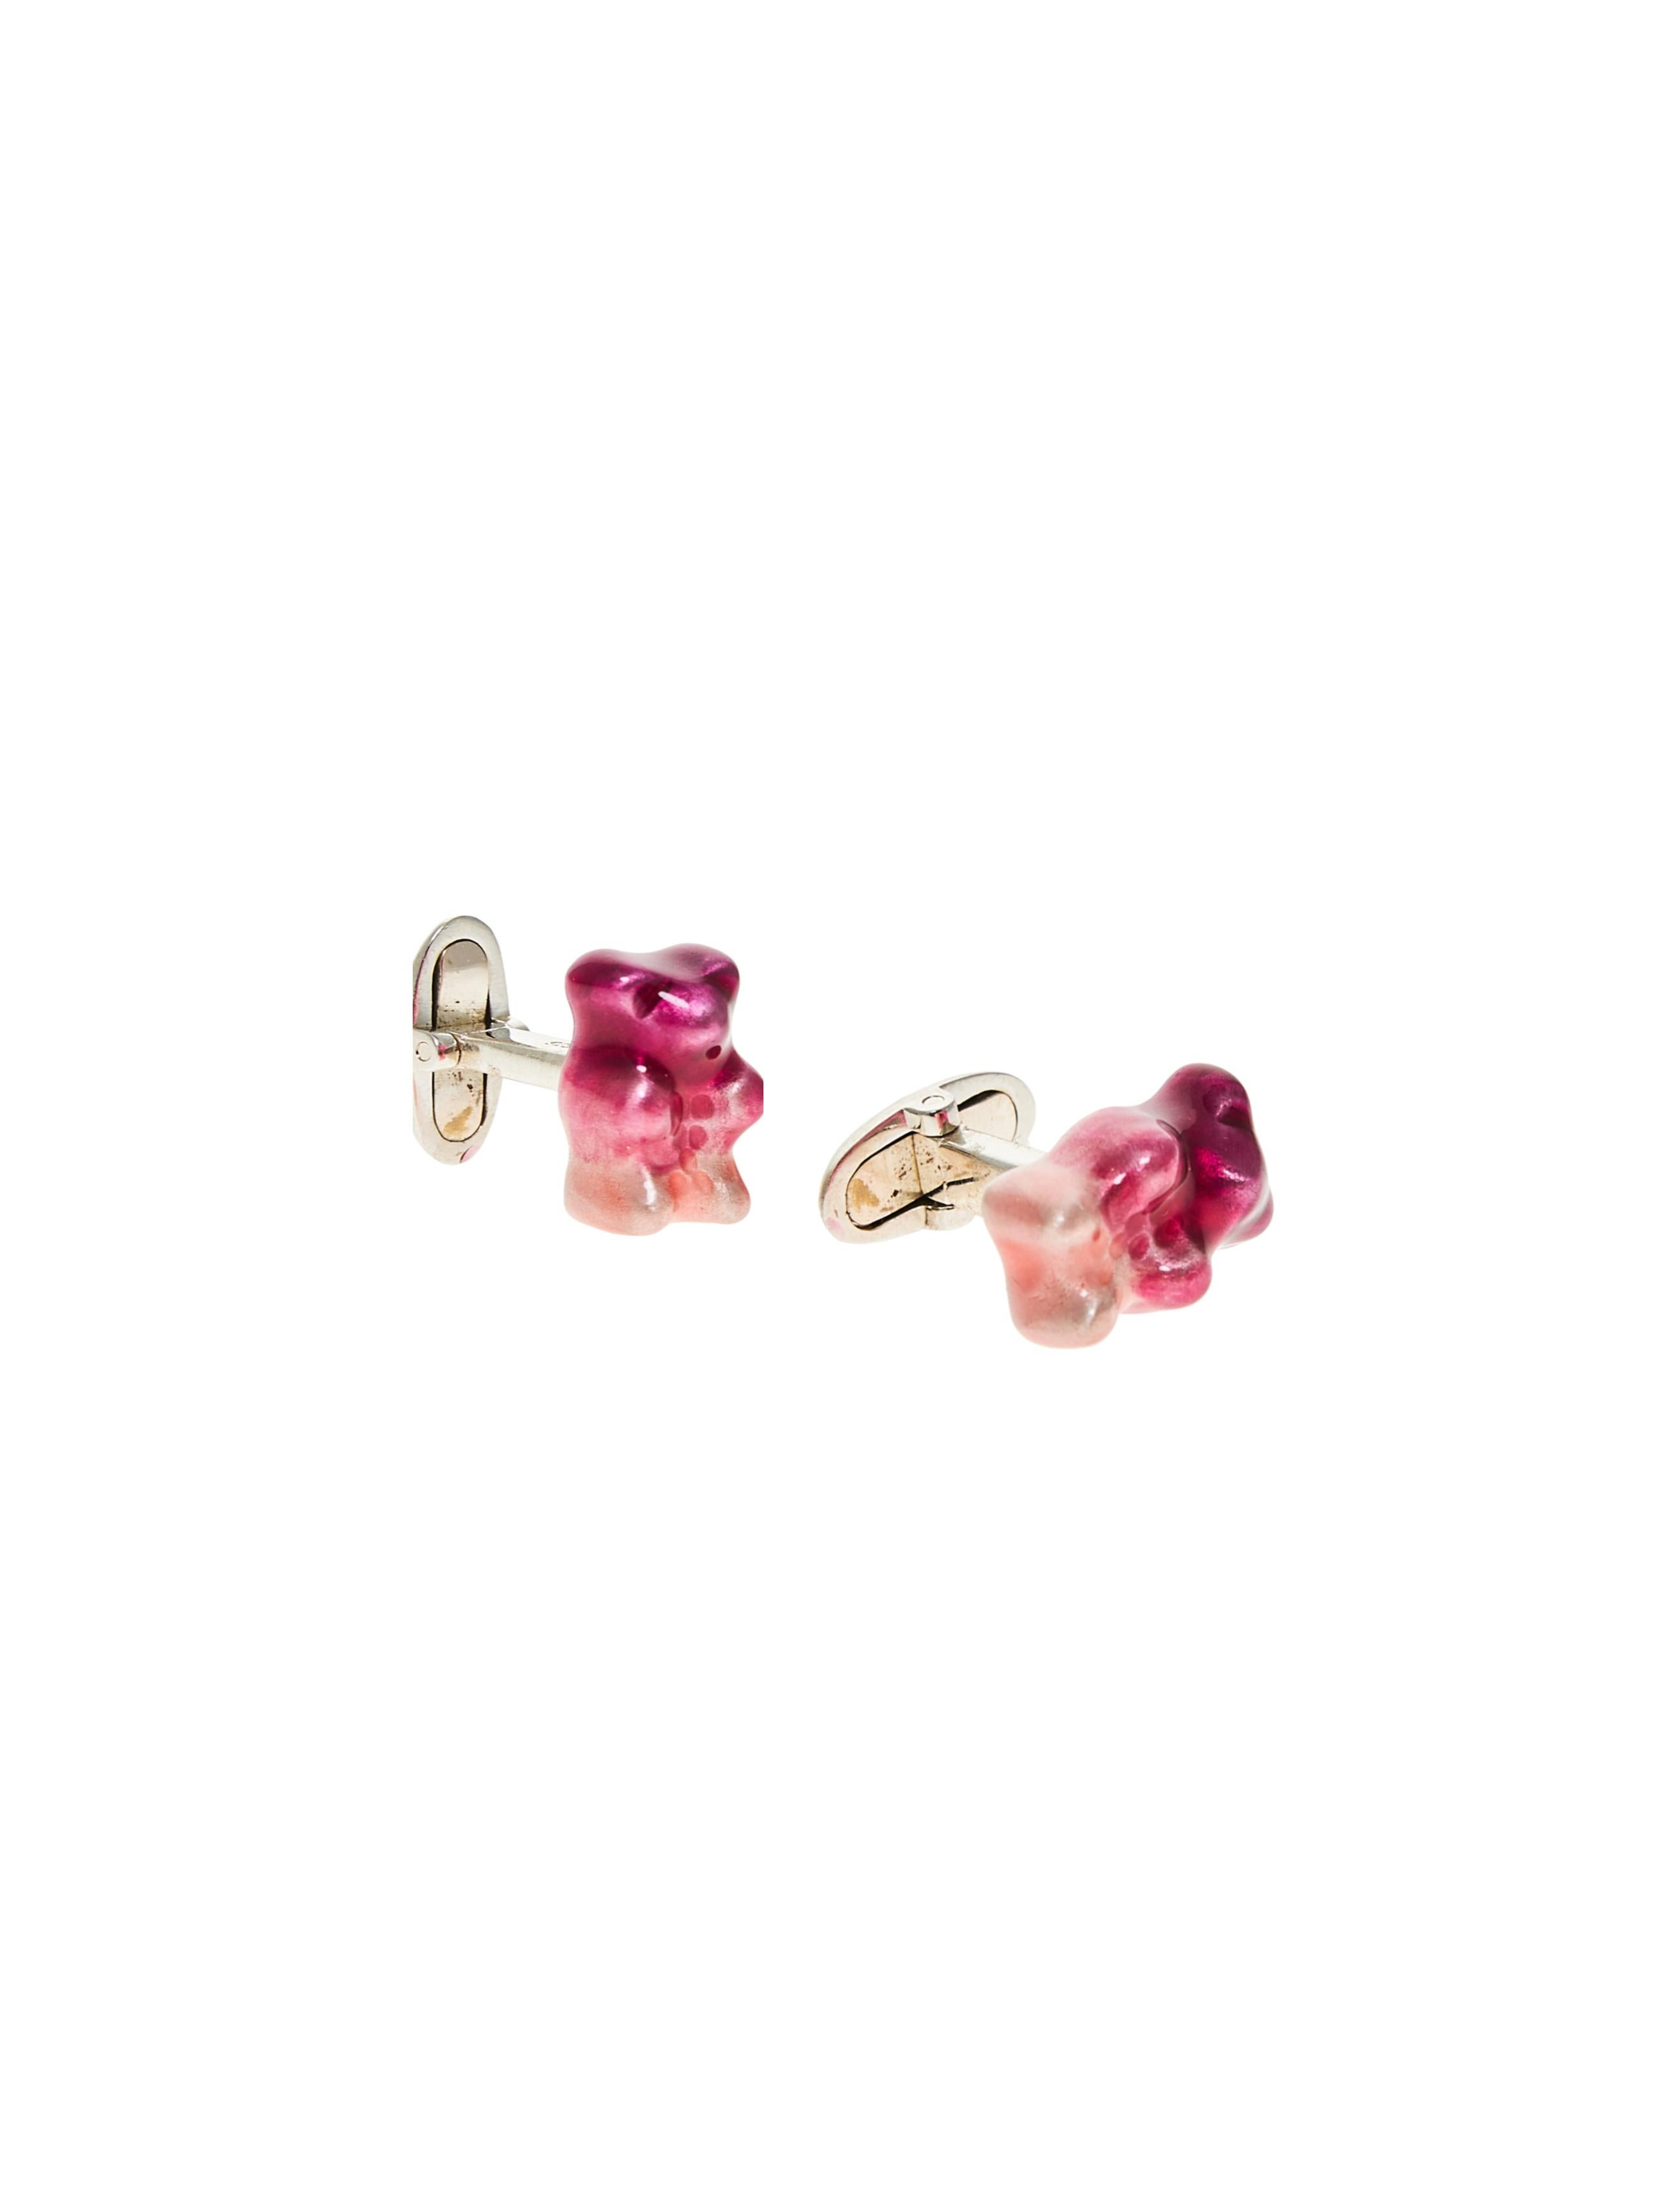 18K gold plated silver gummy bear cufflinks with transparent Ombre Plum  enamel coverage. 

The Gummy Project by Maggoosh is a capsule collection inspired by the designer's life in New York City and her passion for breakdancing and other street